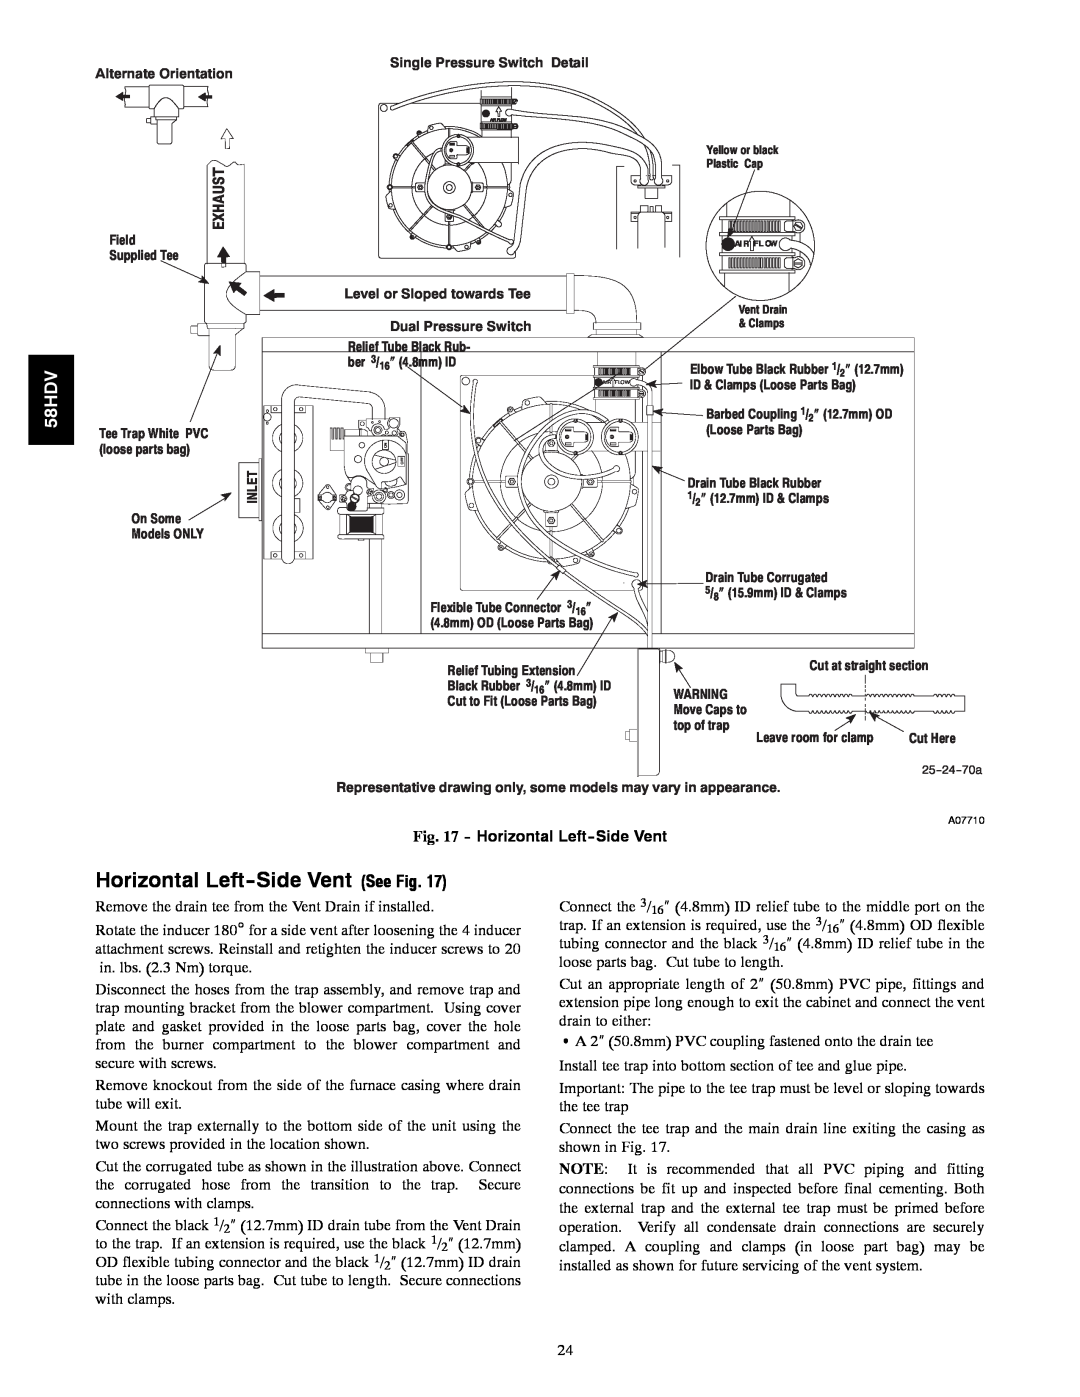 Carrier 58HDV installation instructions Horizontal Left-SideVent See Fig 